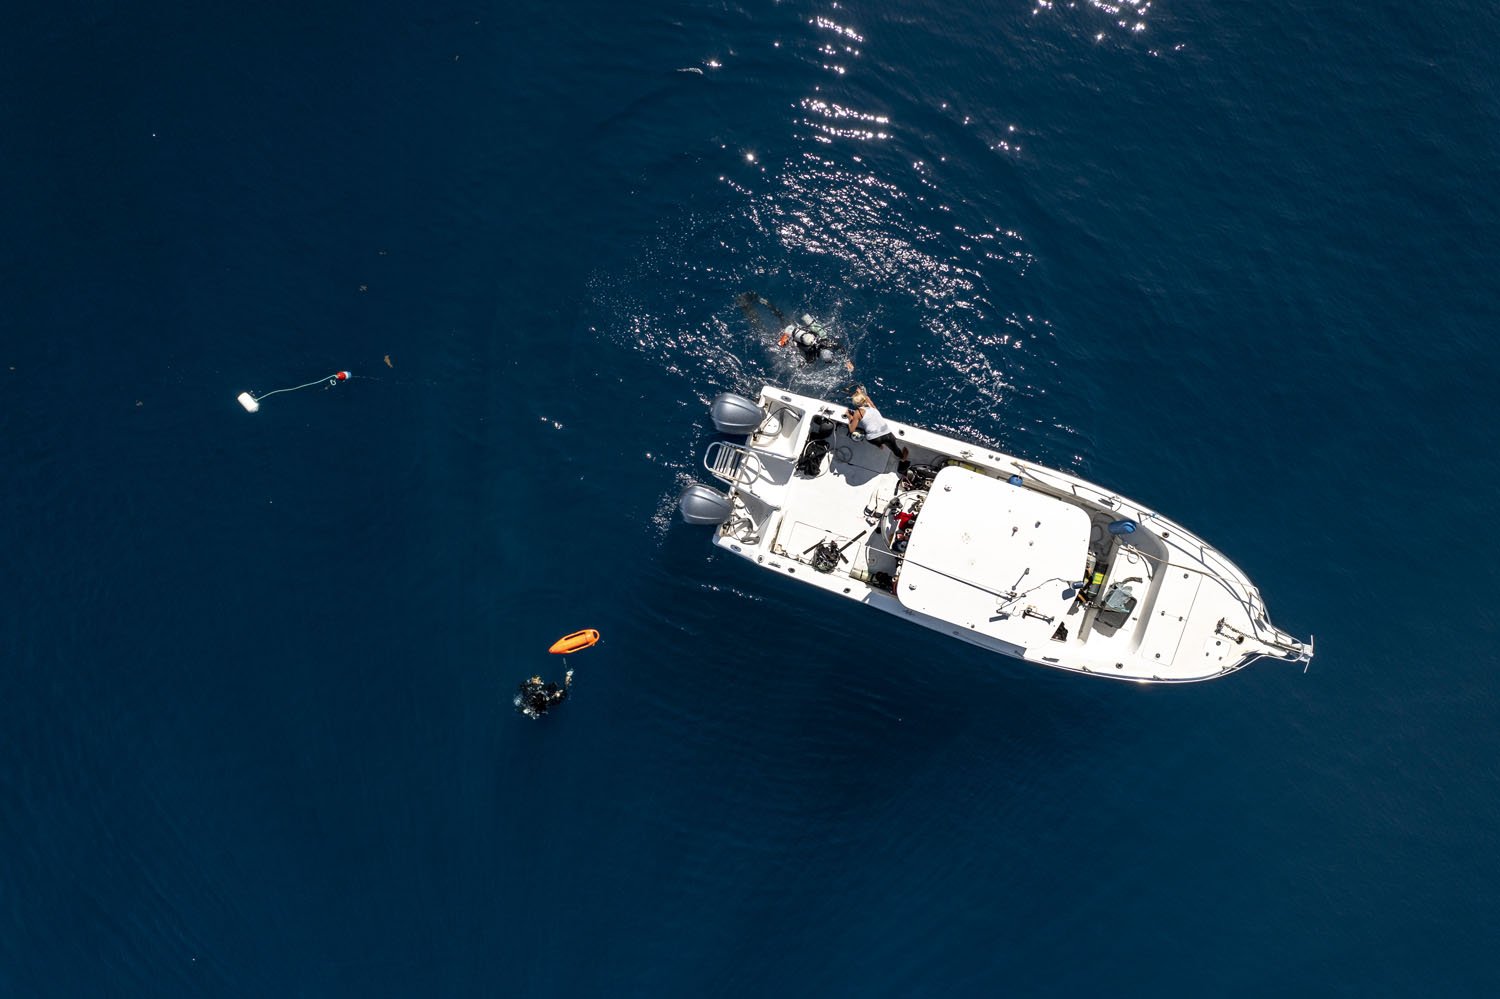  Executing these missions require a highly skilled team. Proficiency as a boat operator, technical diver, biologist, and supportive team player are crucial elements to ensuring a smooth and safe operation. 